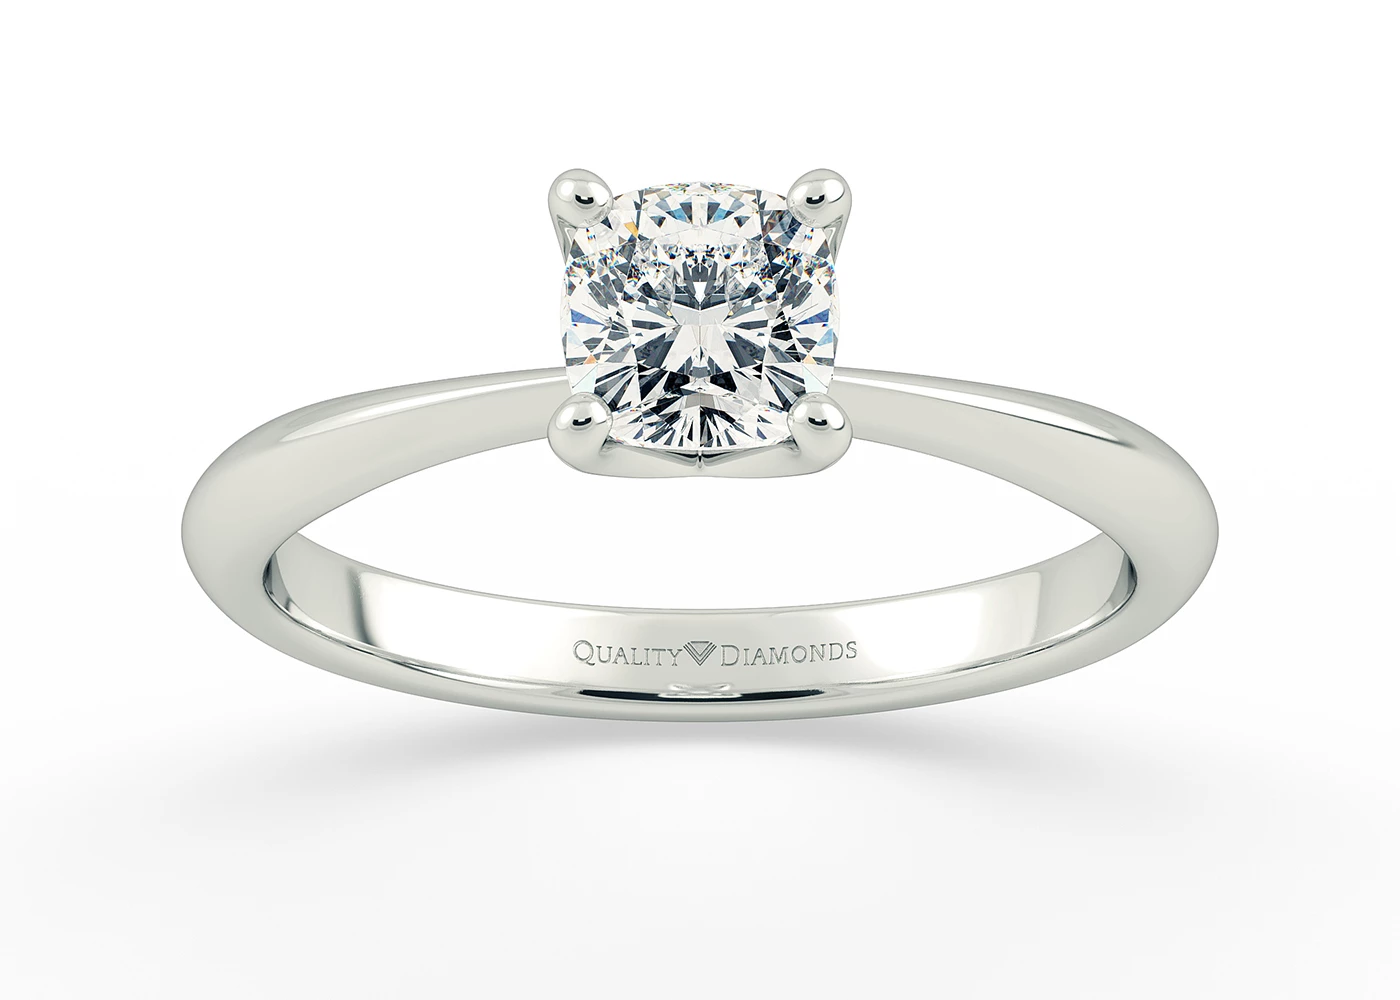 Two Carat Cushion Solitaire Diamond Engagement Ring in Platinum 950